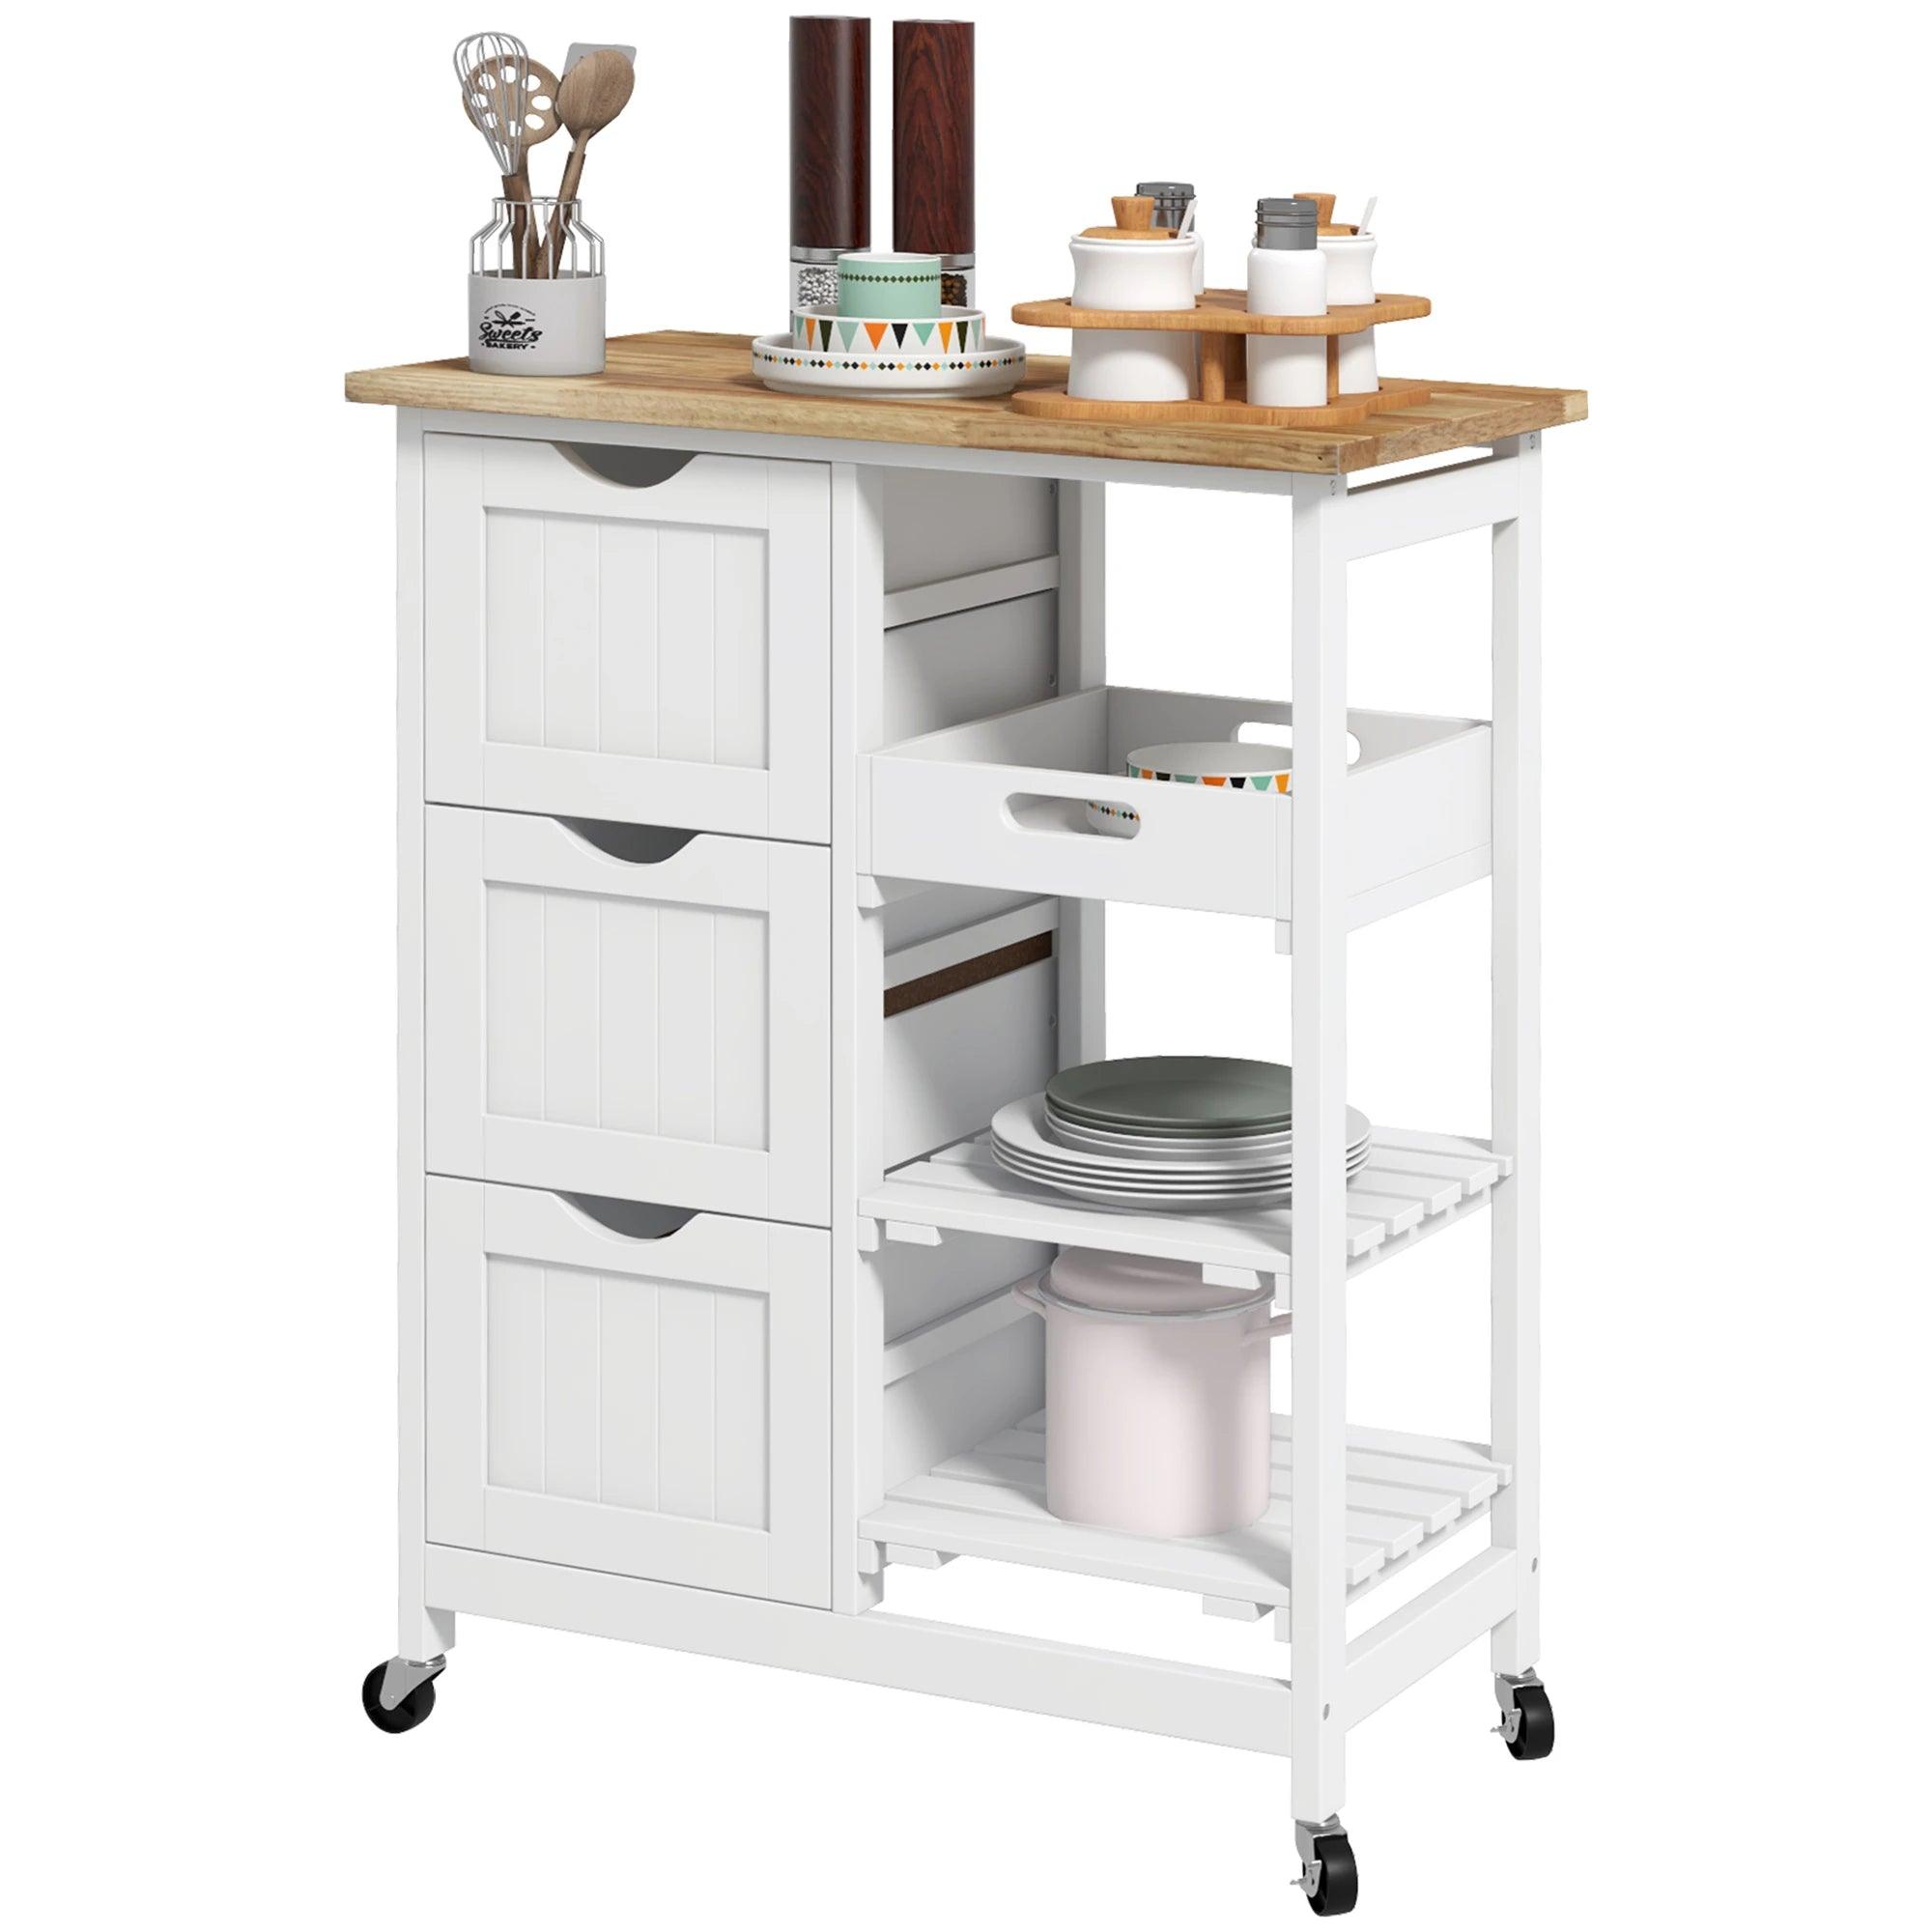 Kitchen Cart on Wheels, Rolling Kitchen Island Cart with Wood Top, 3 Drawers and Shelves for Home Dining Area